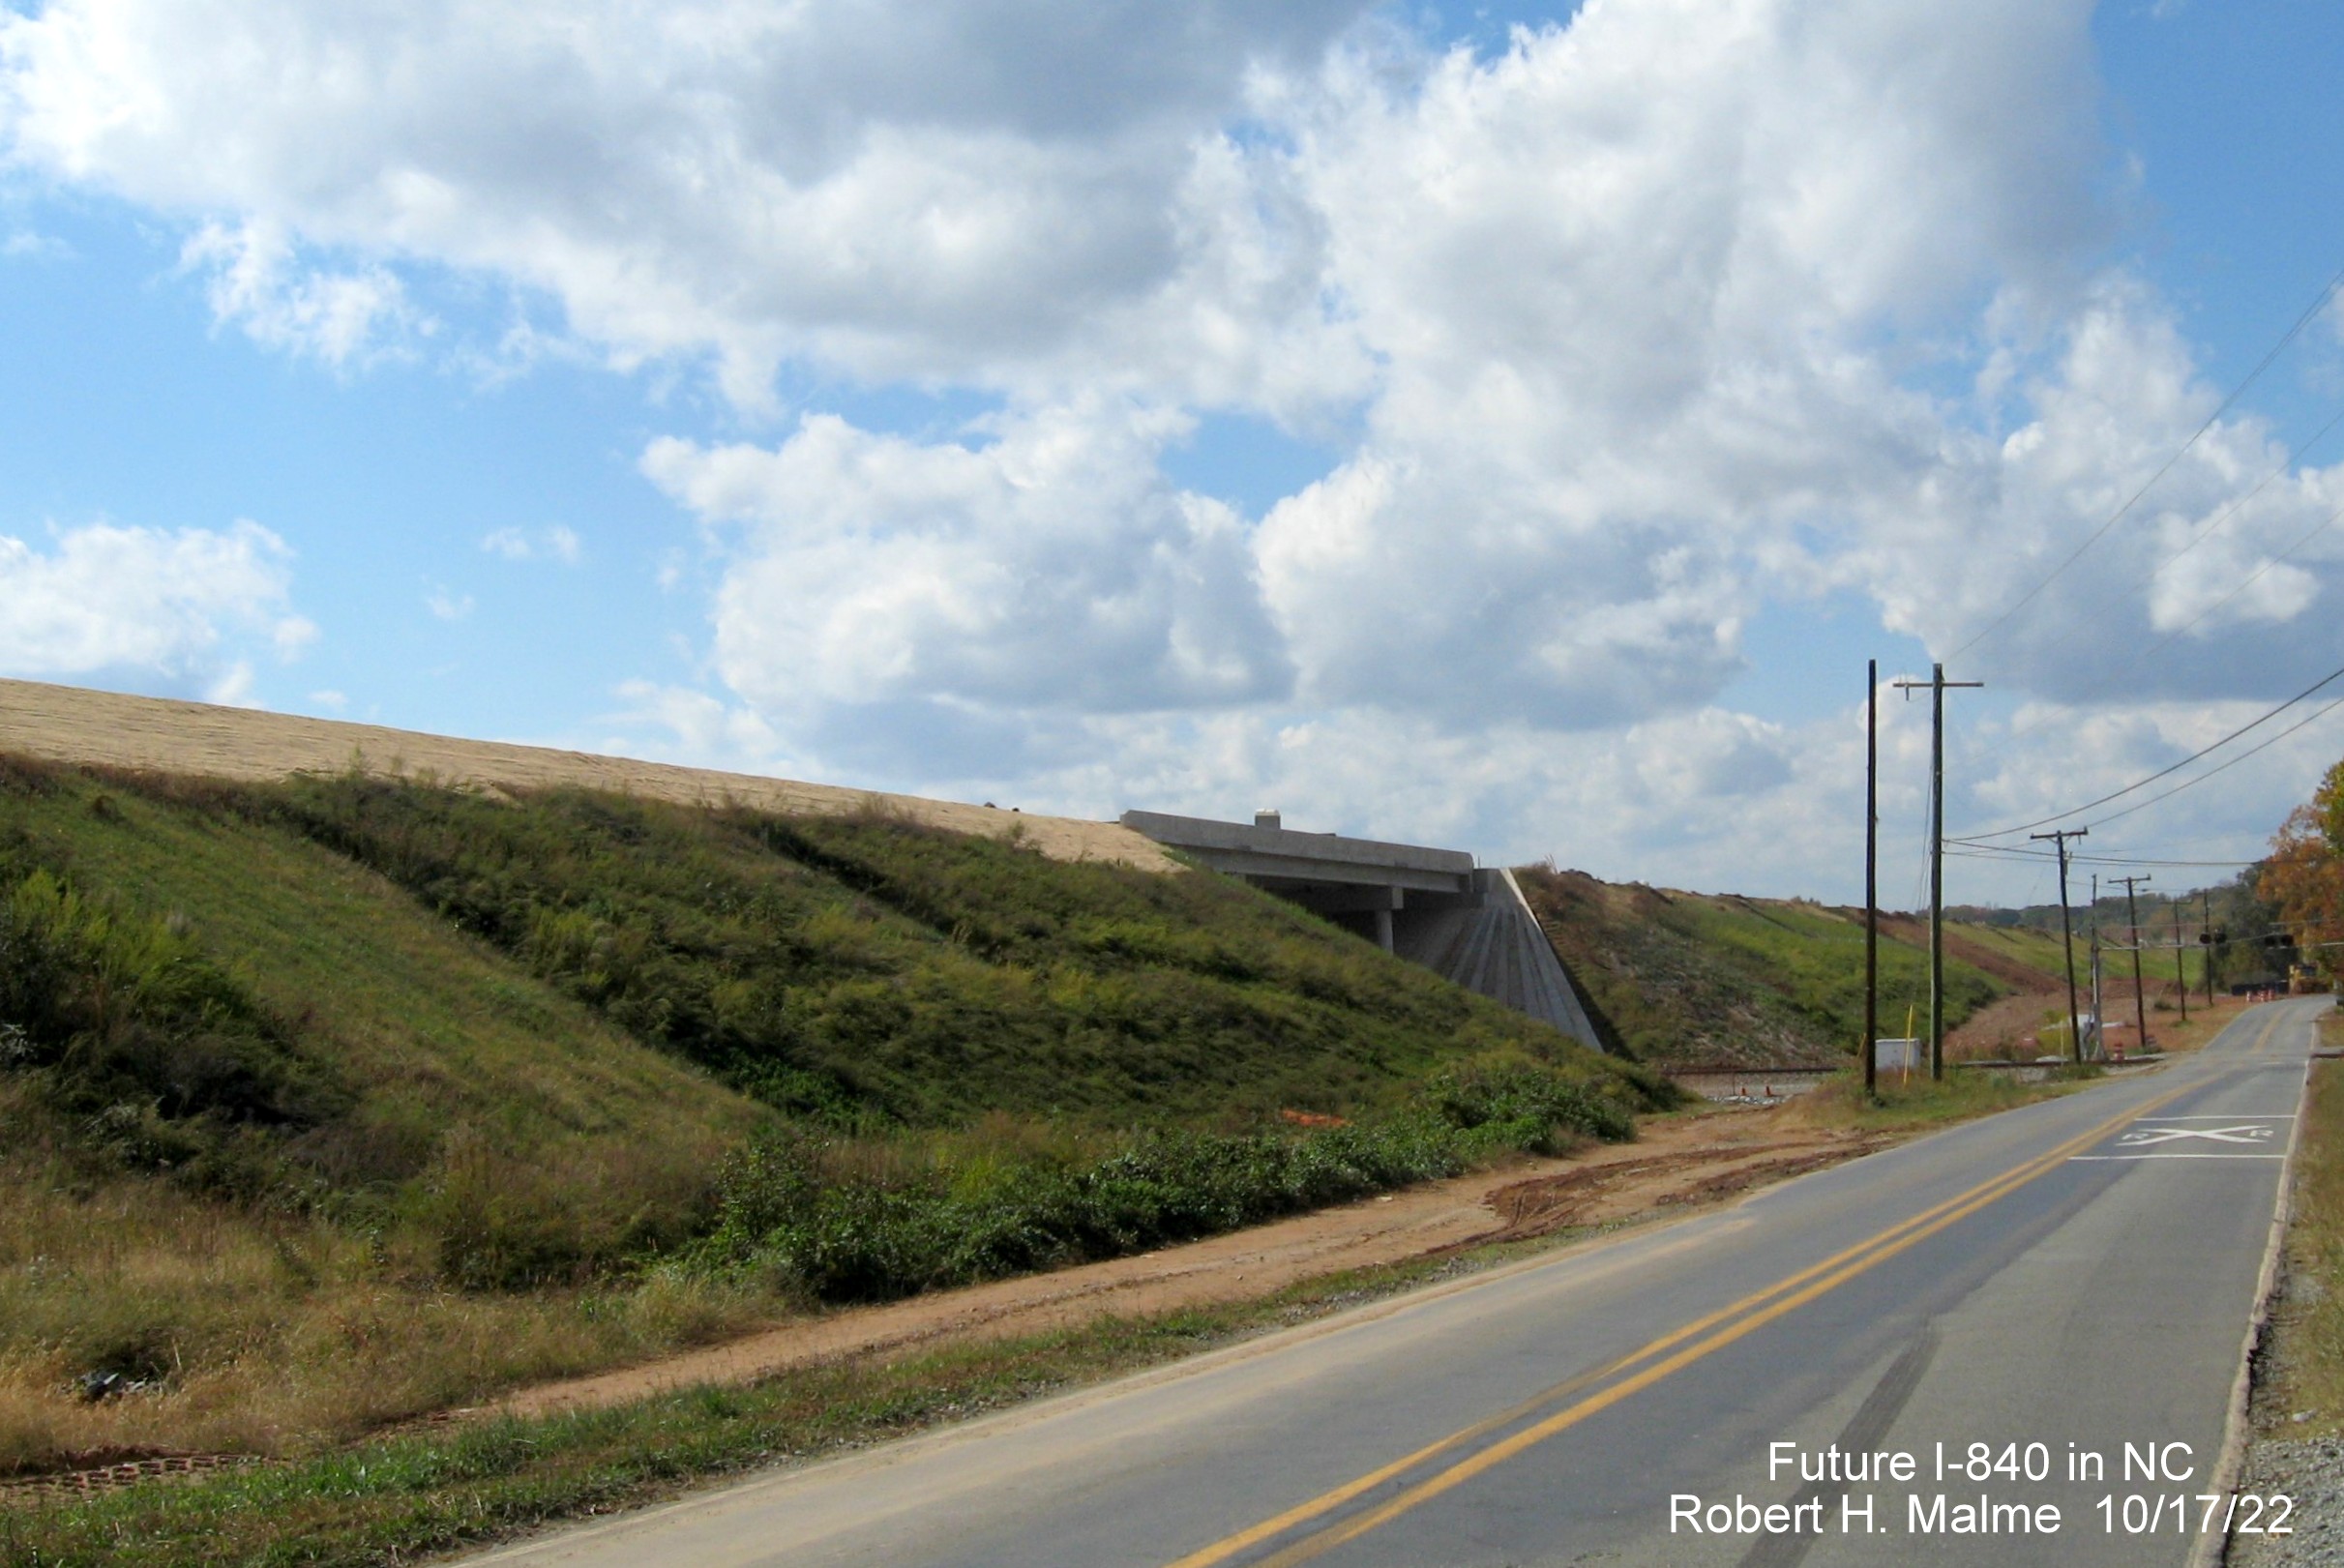 Image of future Greensboro Loop paralleling Hillcroft Road headed west, October 2022